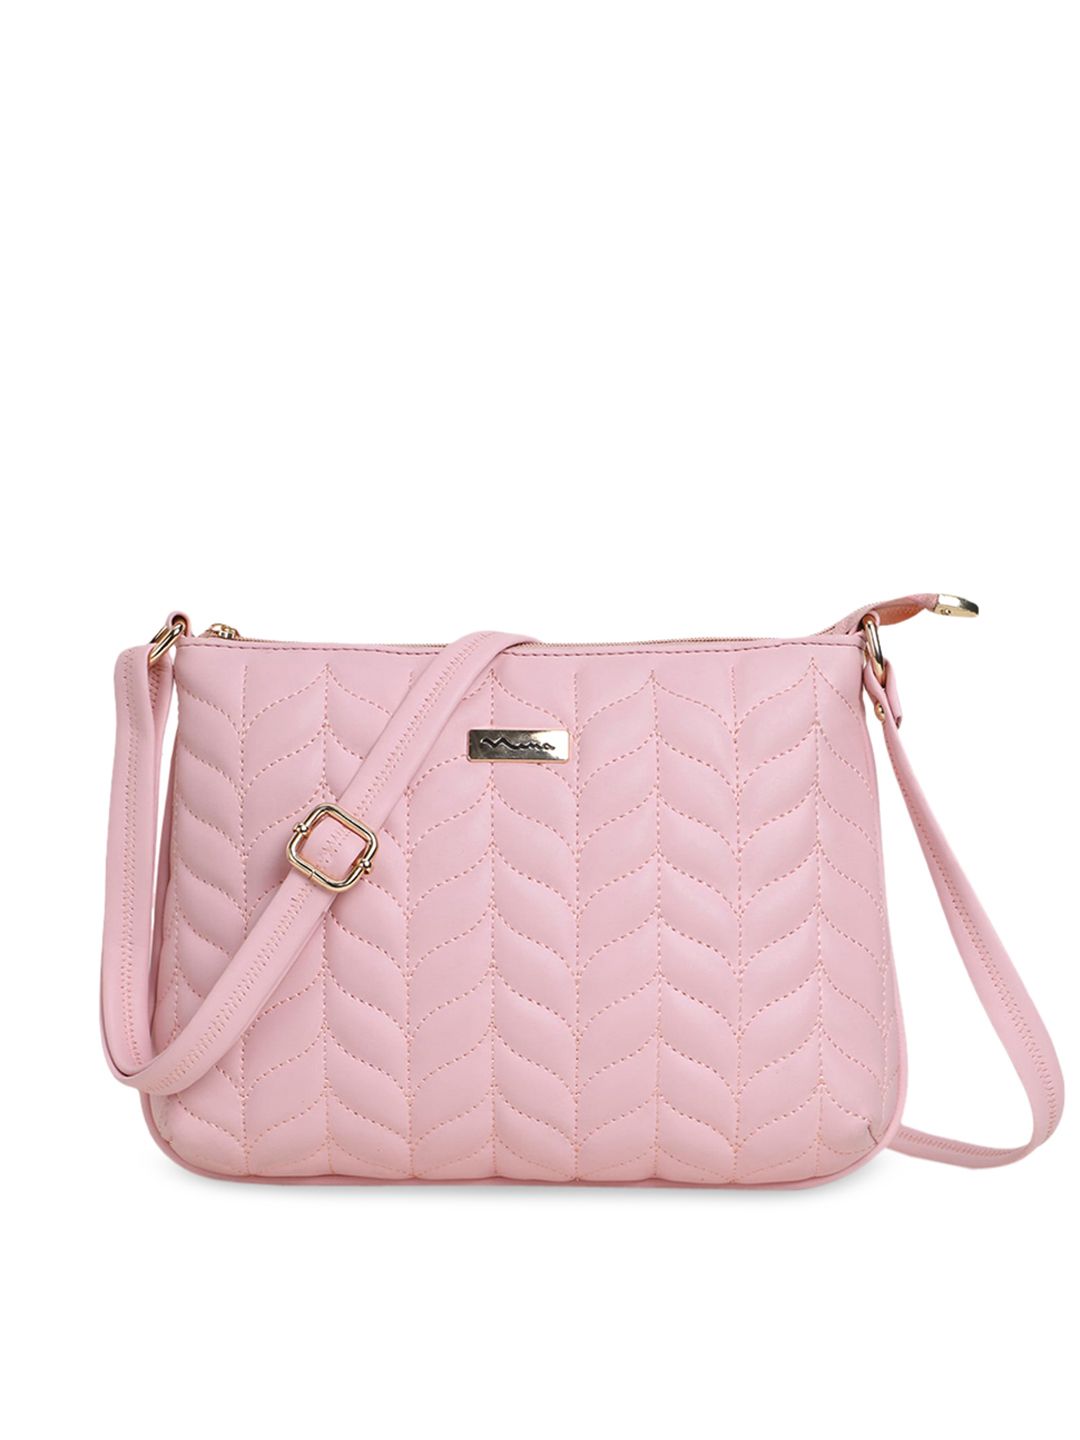 SHINING STAR Peach-Coloured Textured PU Structured Sling Bag with Quilted Price in India